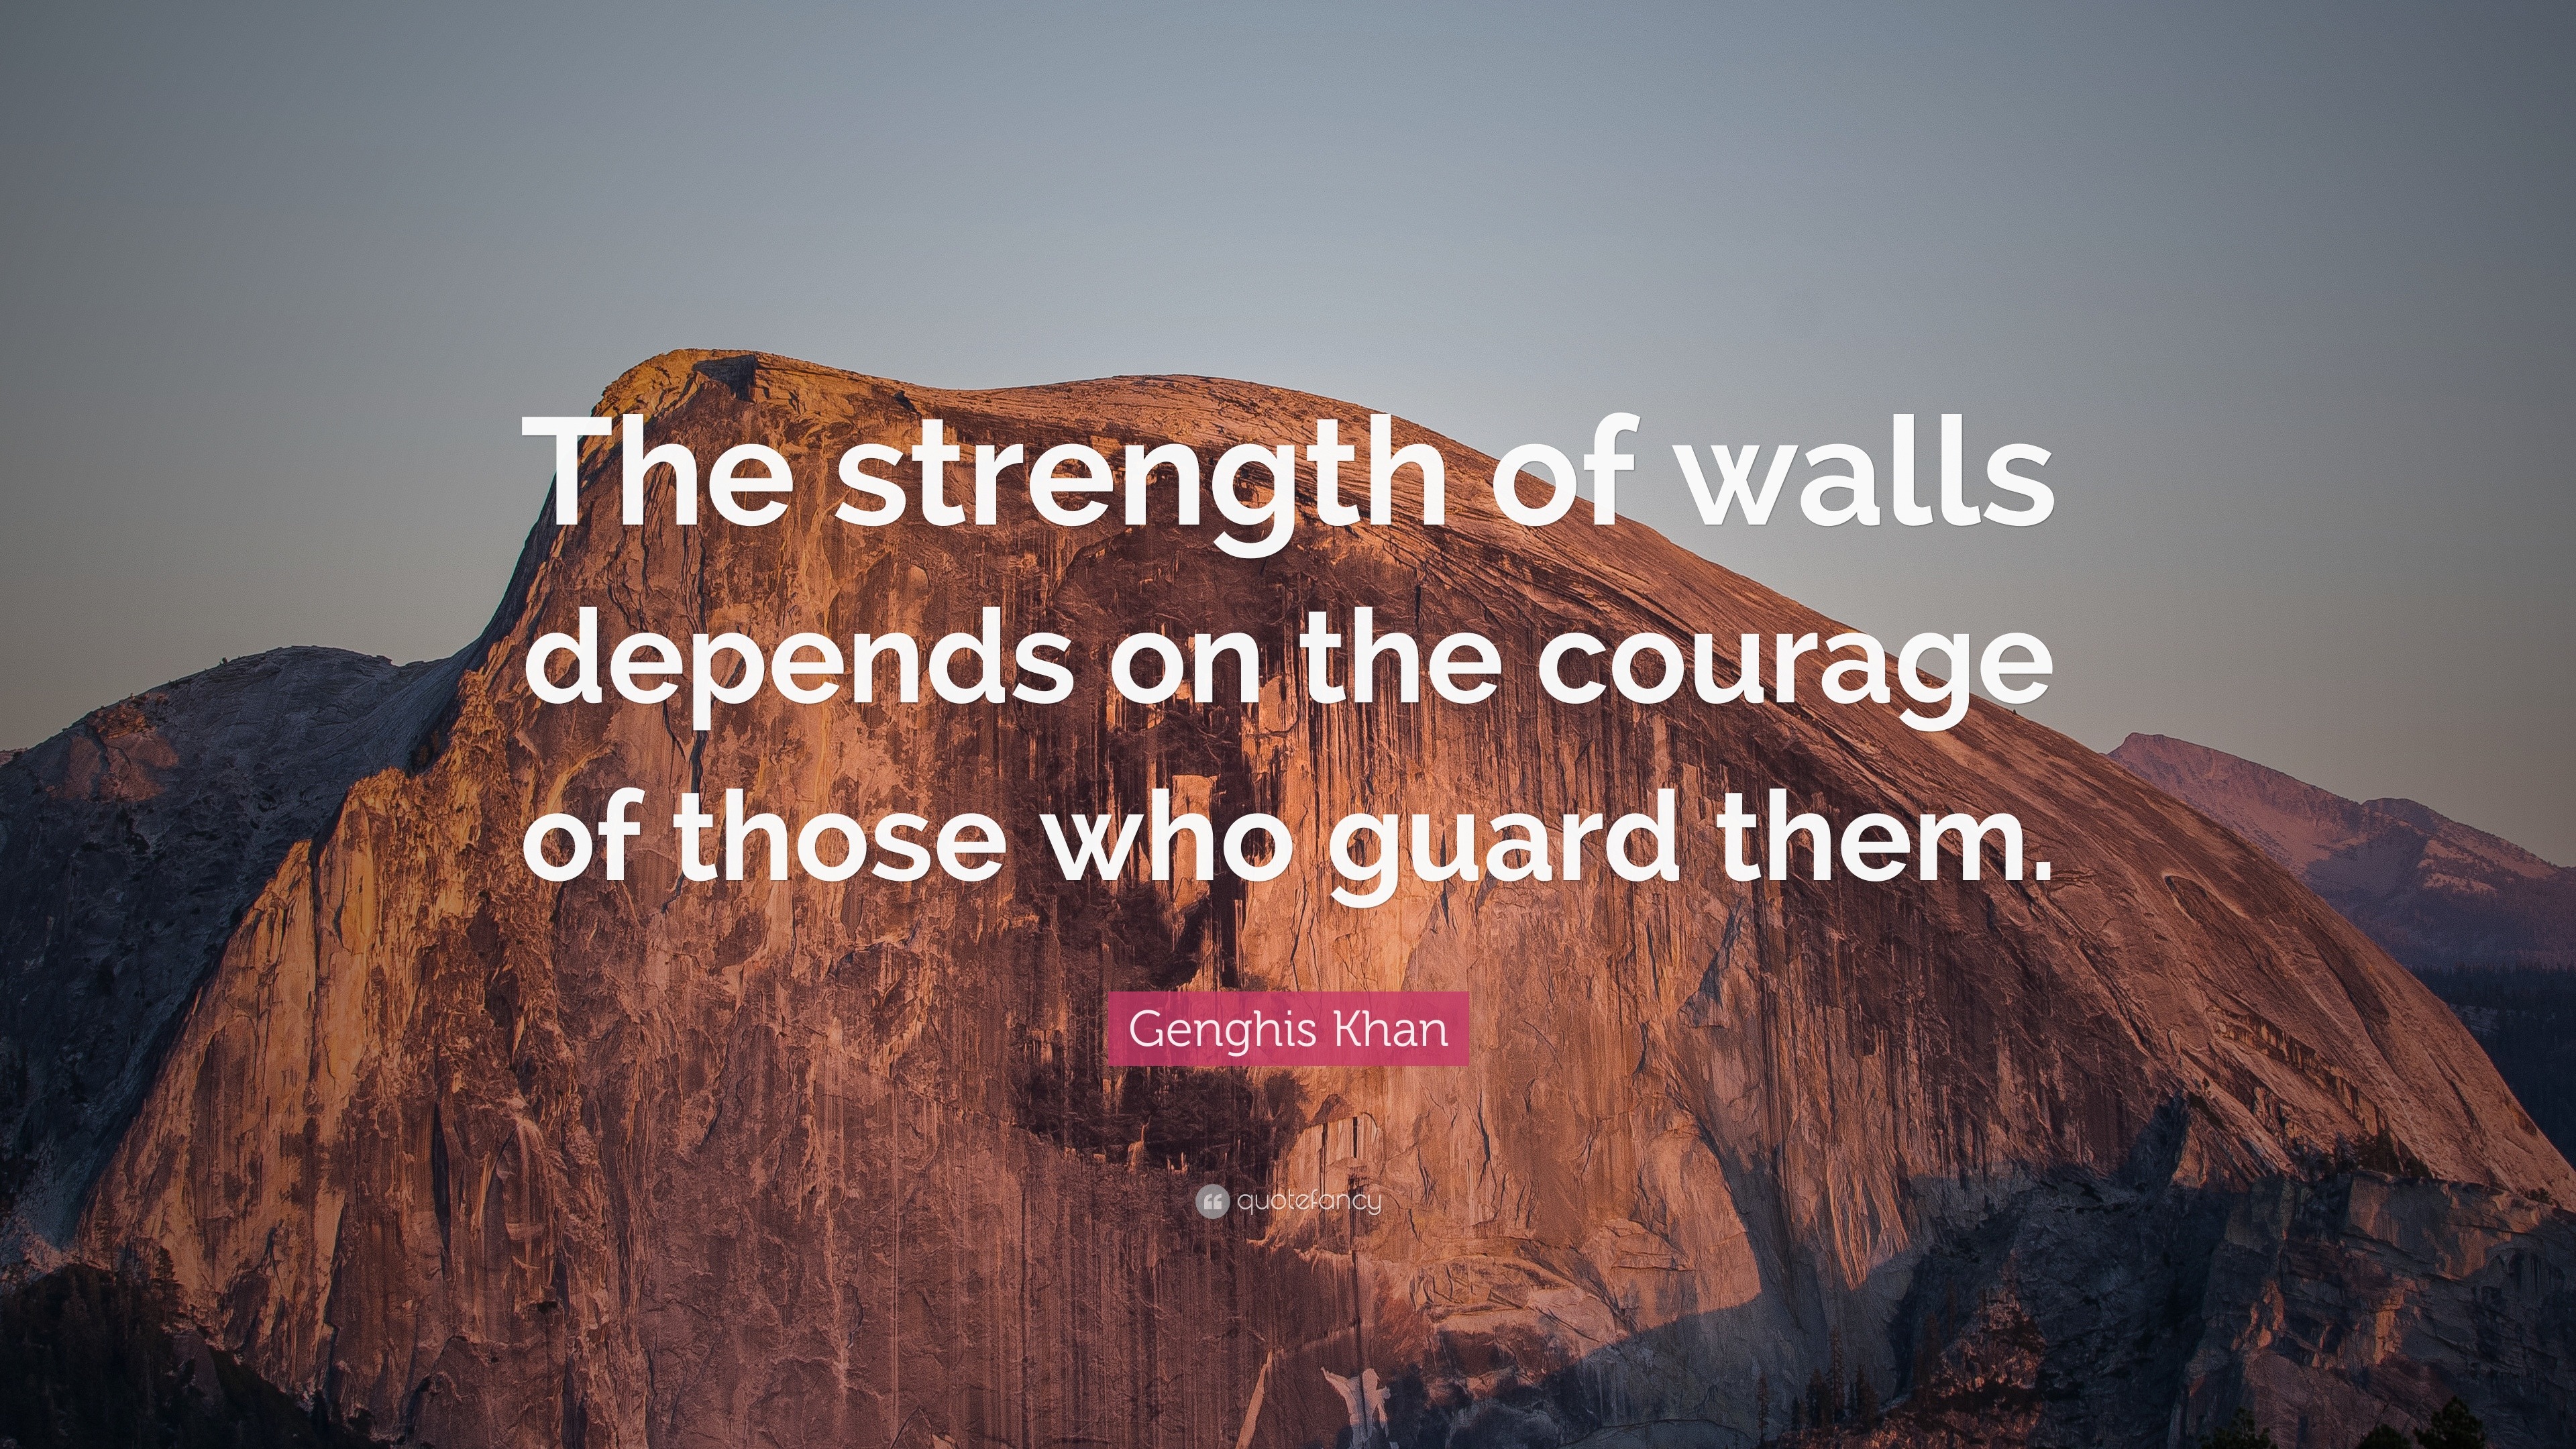 Genghis Khan Quote: “The strength of walls depends on the courage of